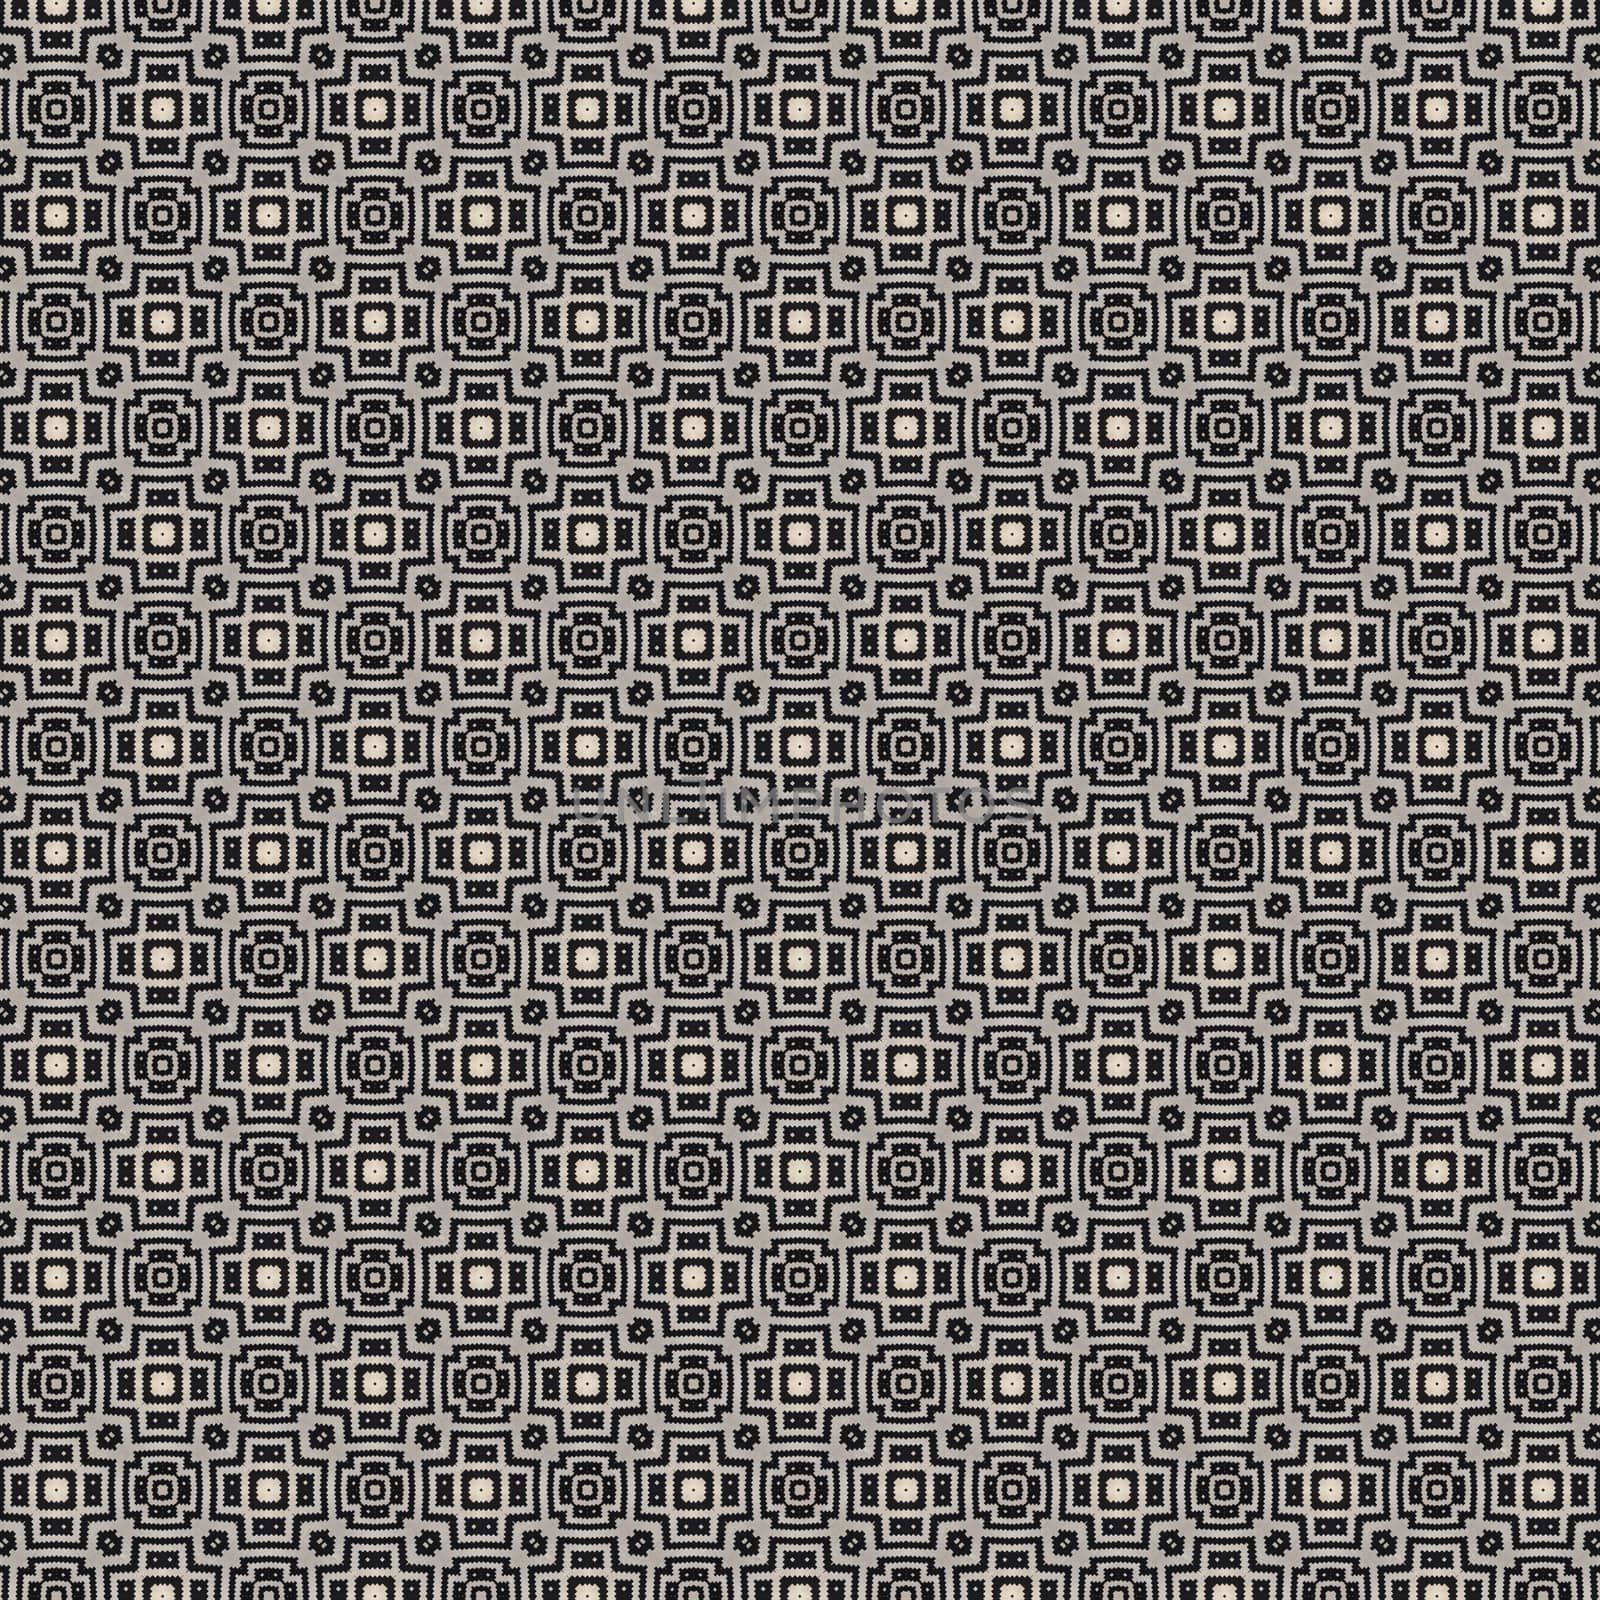 illustration of Fabric or tile pattern design. You can use this pattern for your  interior graphic design wallpaper.